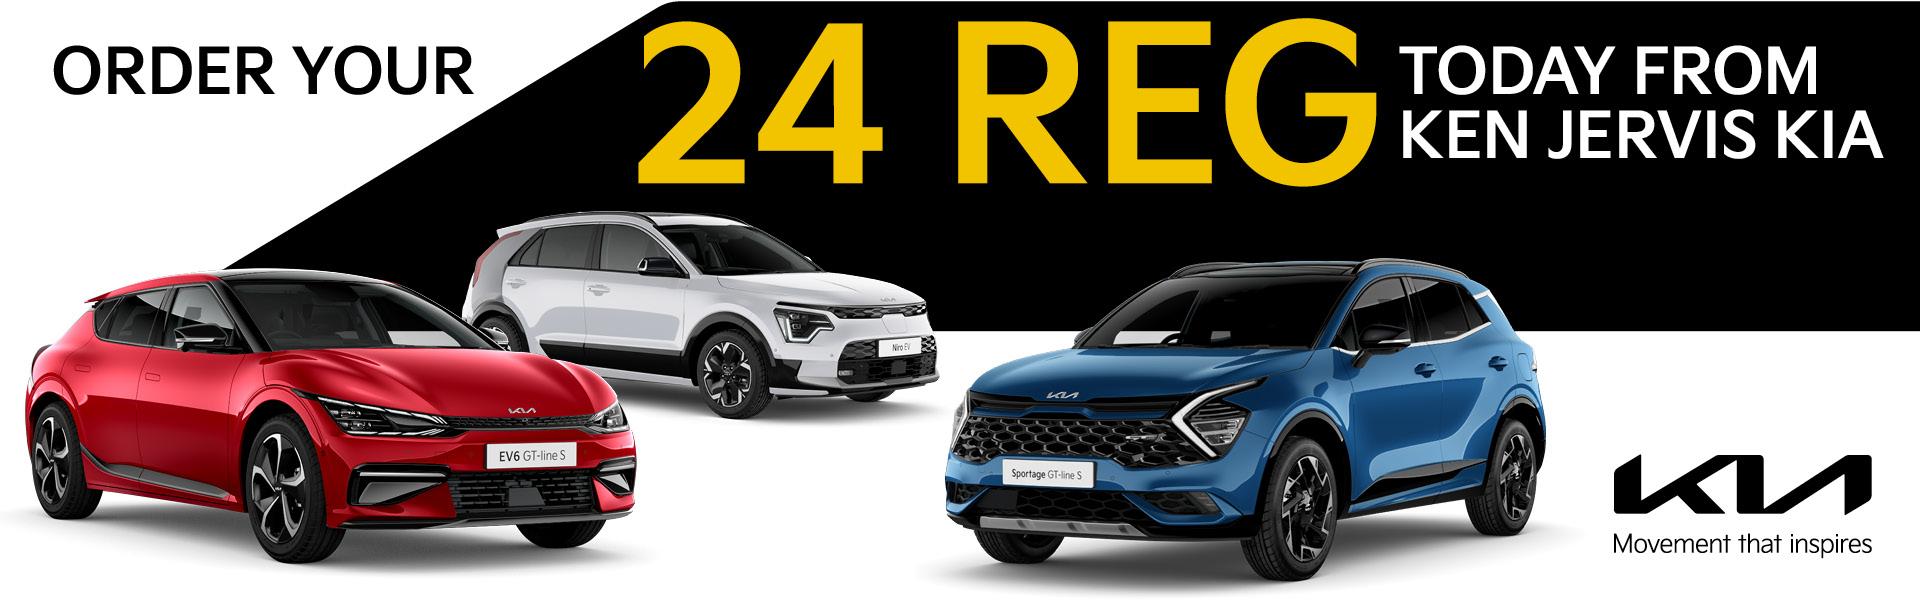 Order your 73 Reg today from Ken Jervis Kia